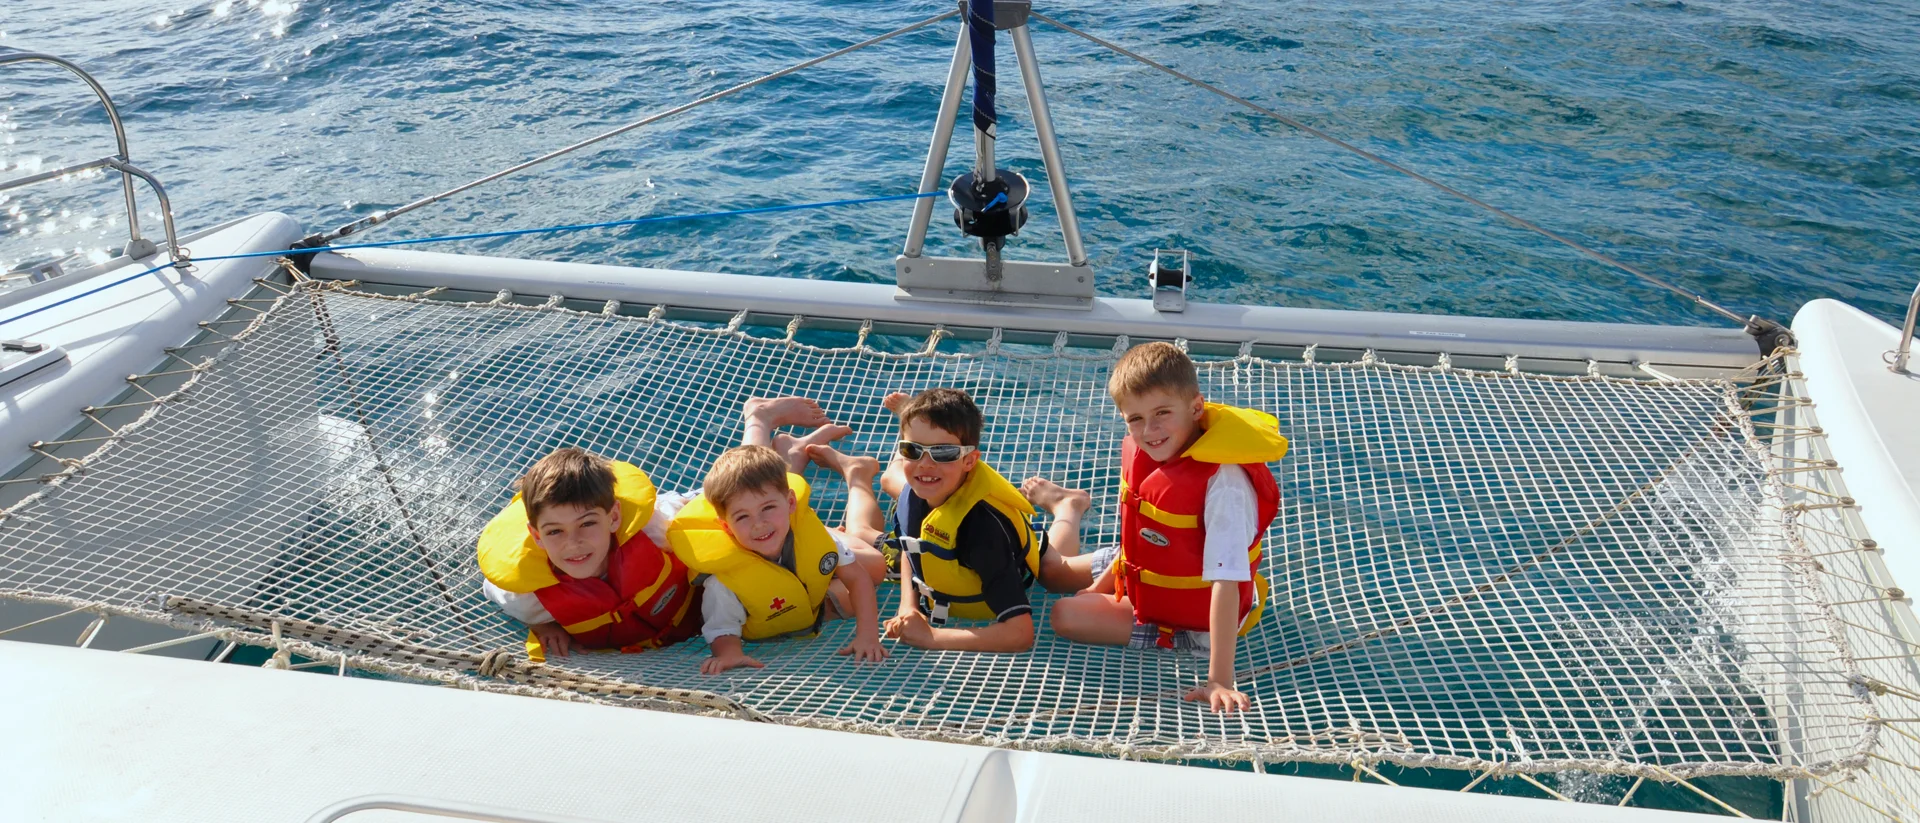 Children enjoying vacation in a catamaran with sunglasses and lifejackets